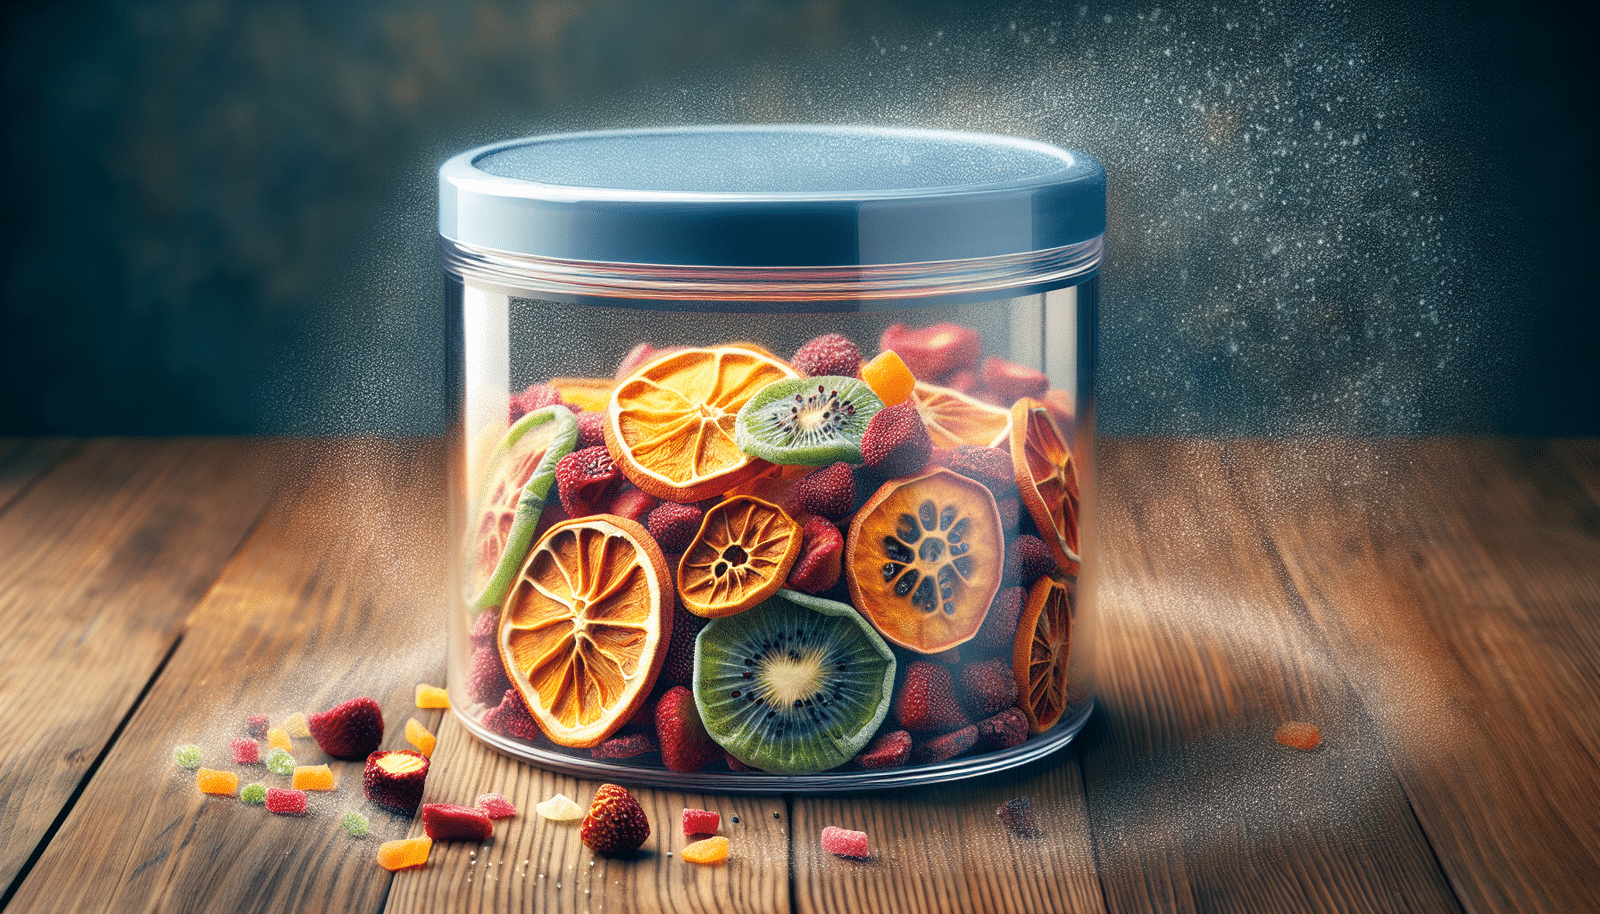 Airtight container for storing dehydrated foods